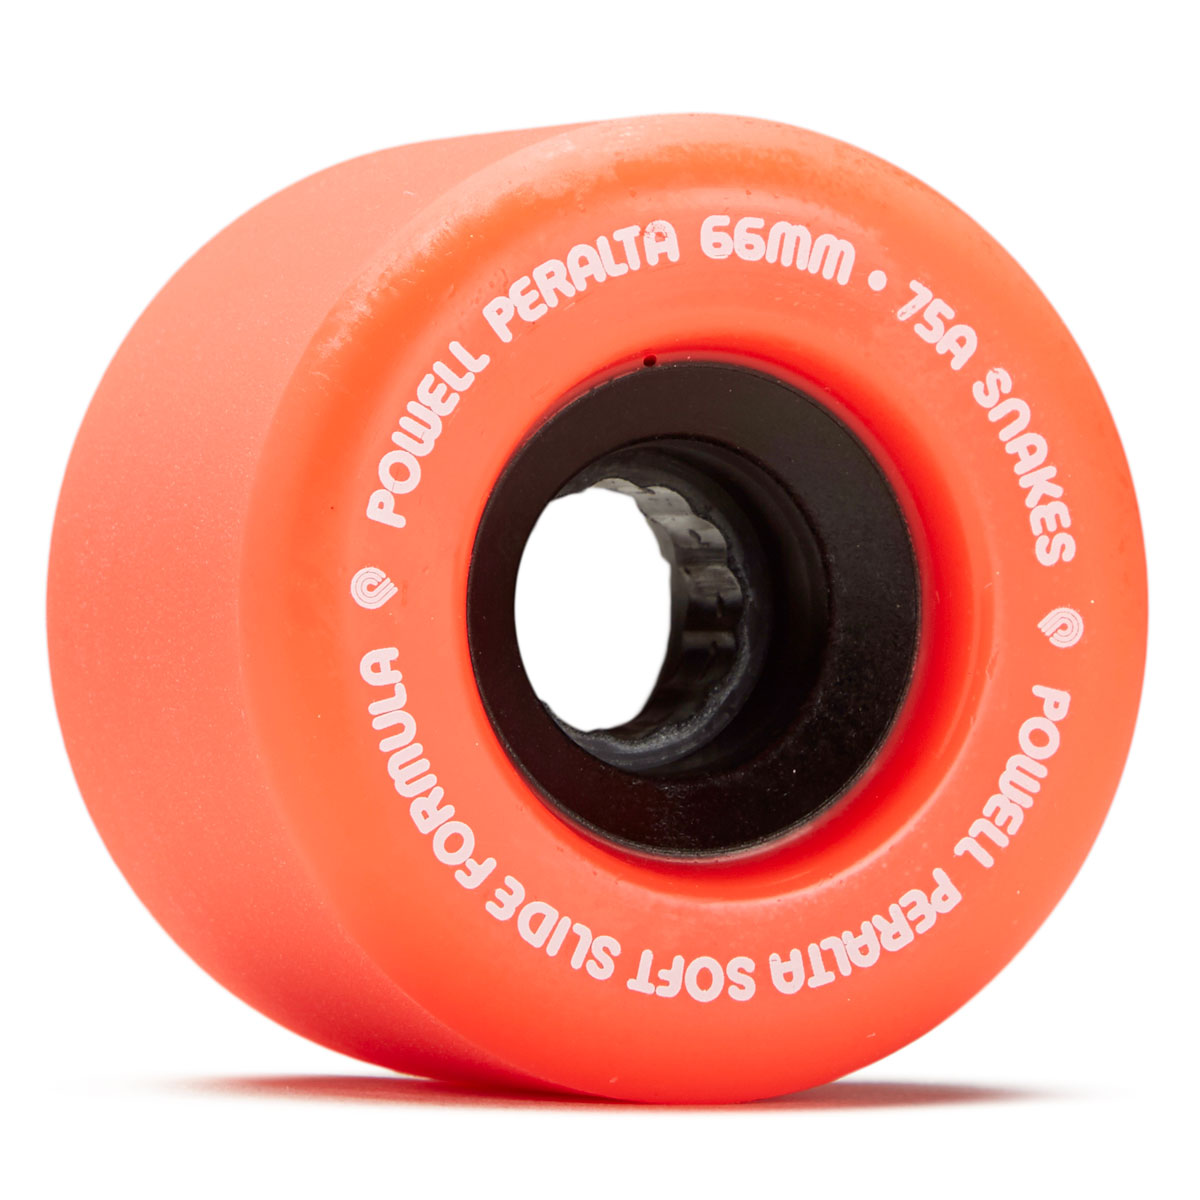 Powell-Peralta Snakes 75A Longboard Wheels - Red - 66mm image 1